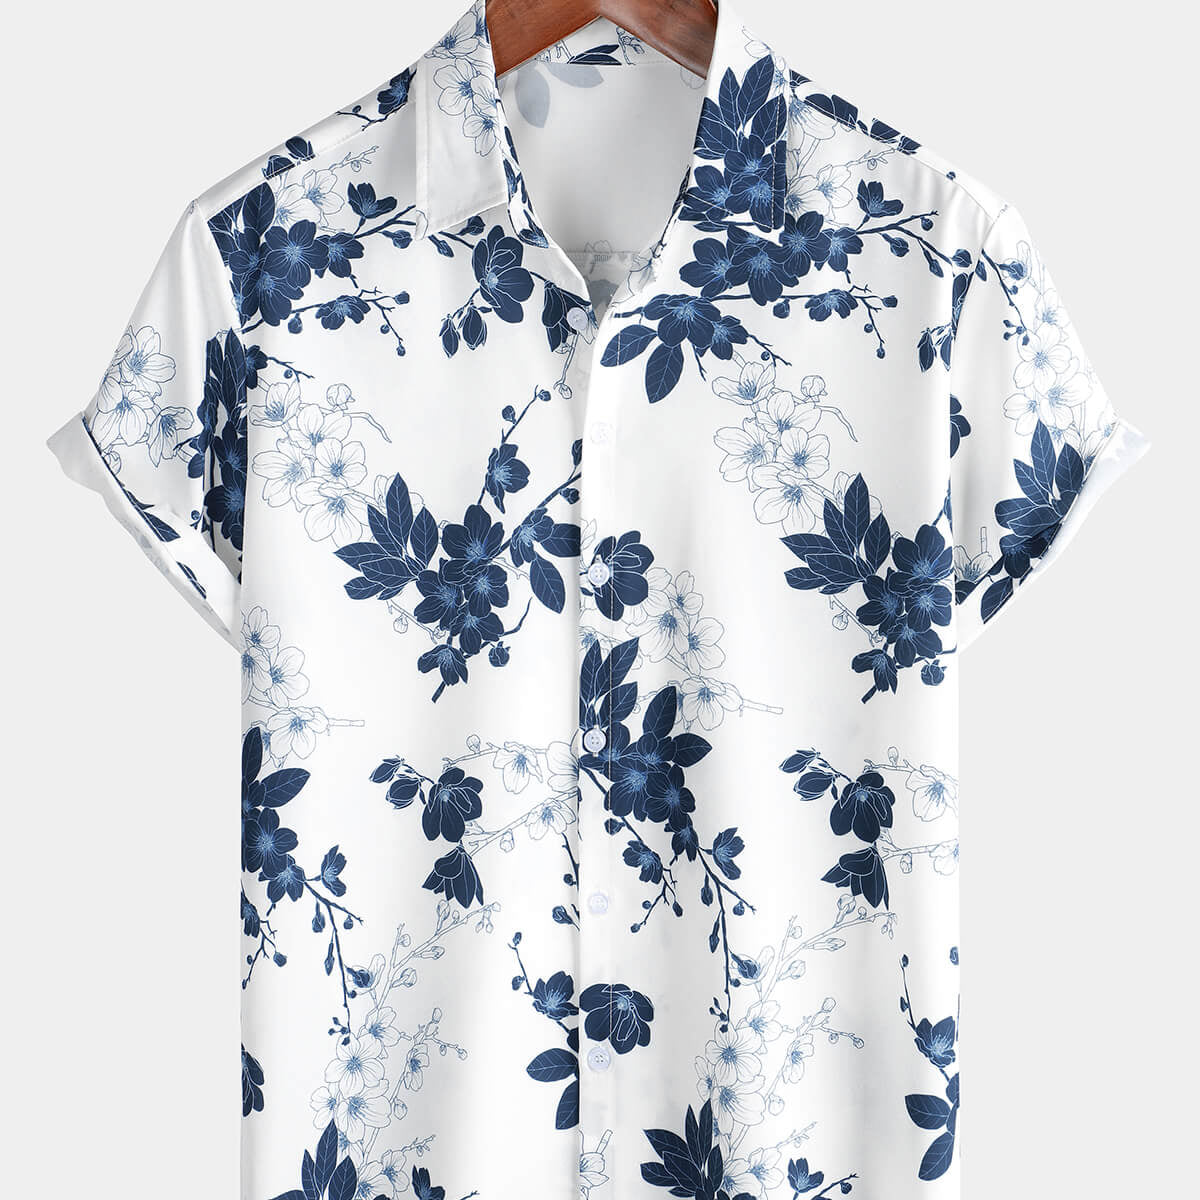 Men's Floral Holiday Summer Casual Short Sleeve Button Up Shirt